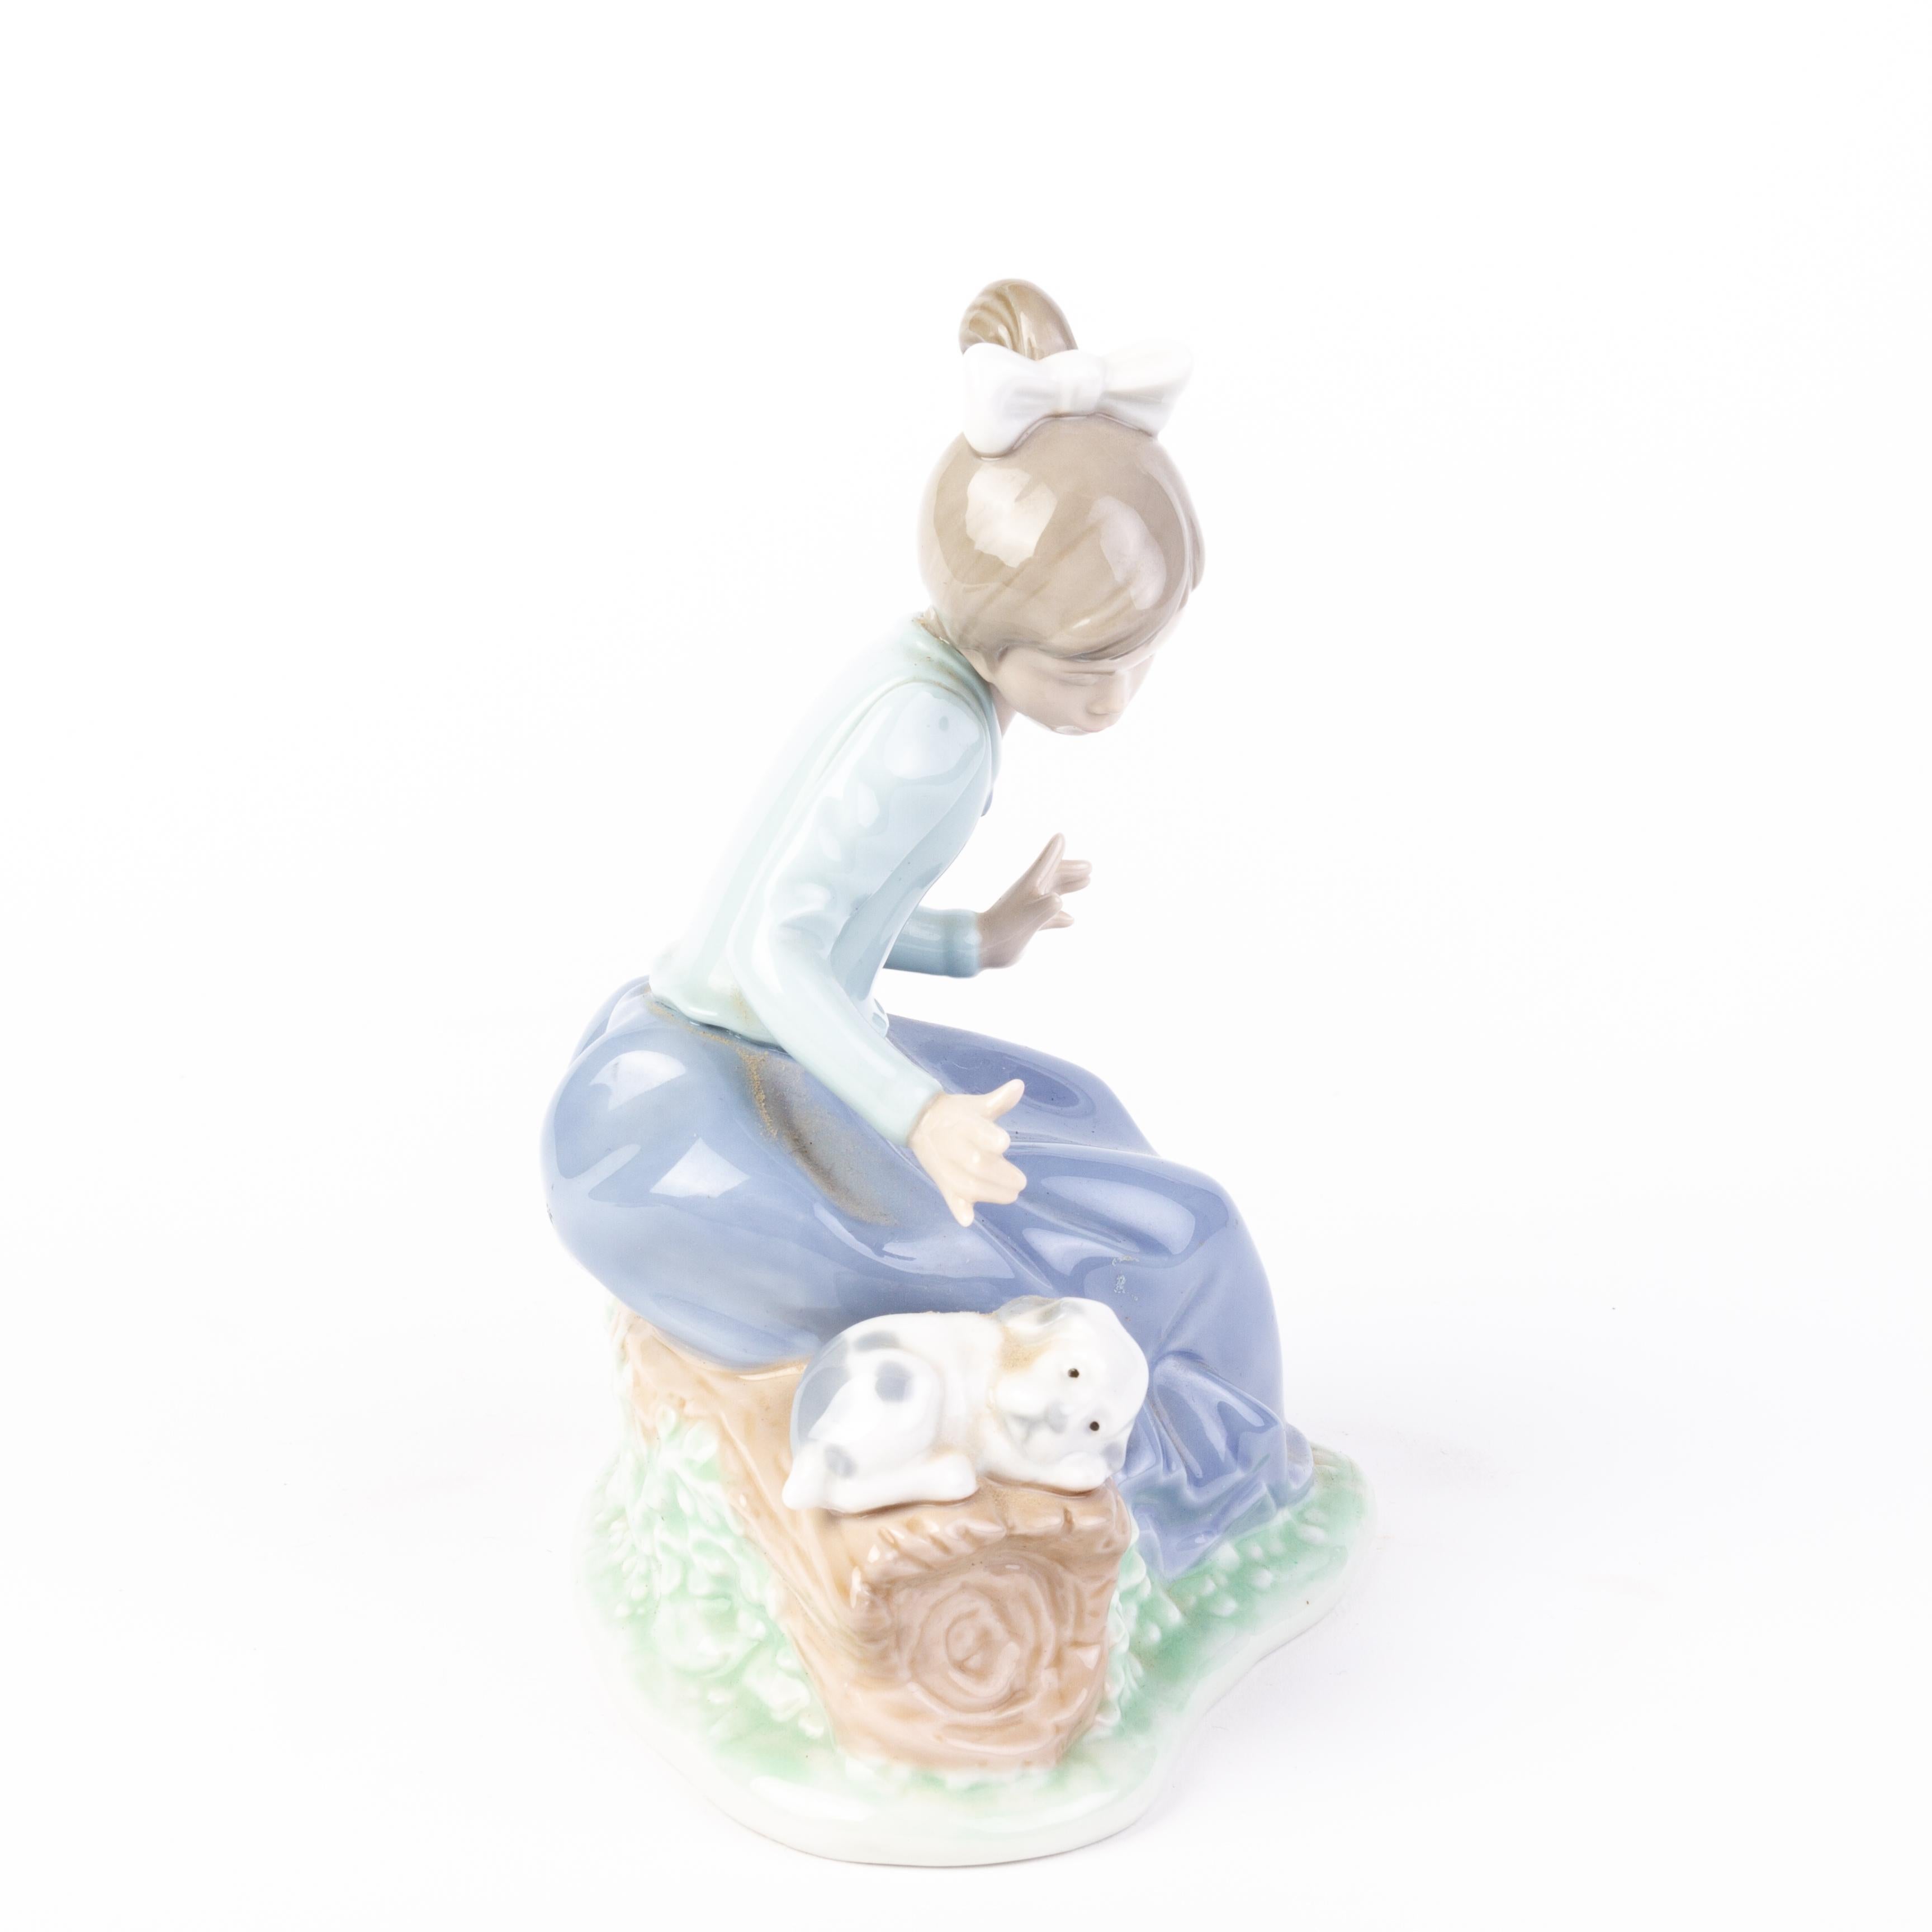 In good condition
From a private collection
Free international shipping
Nao Lladro Fine Porcelain Figure 